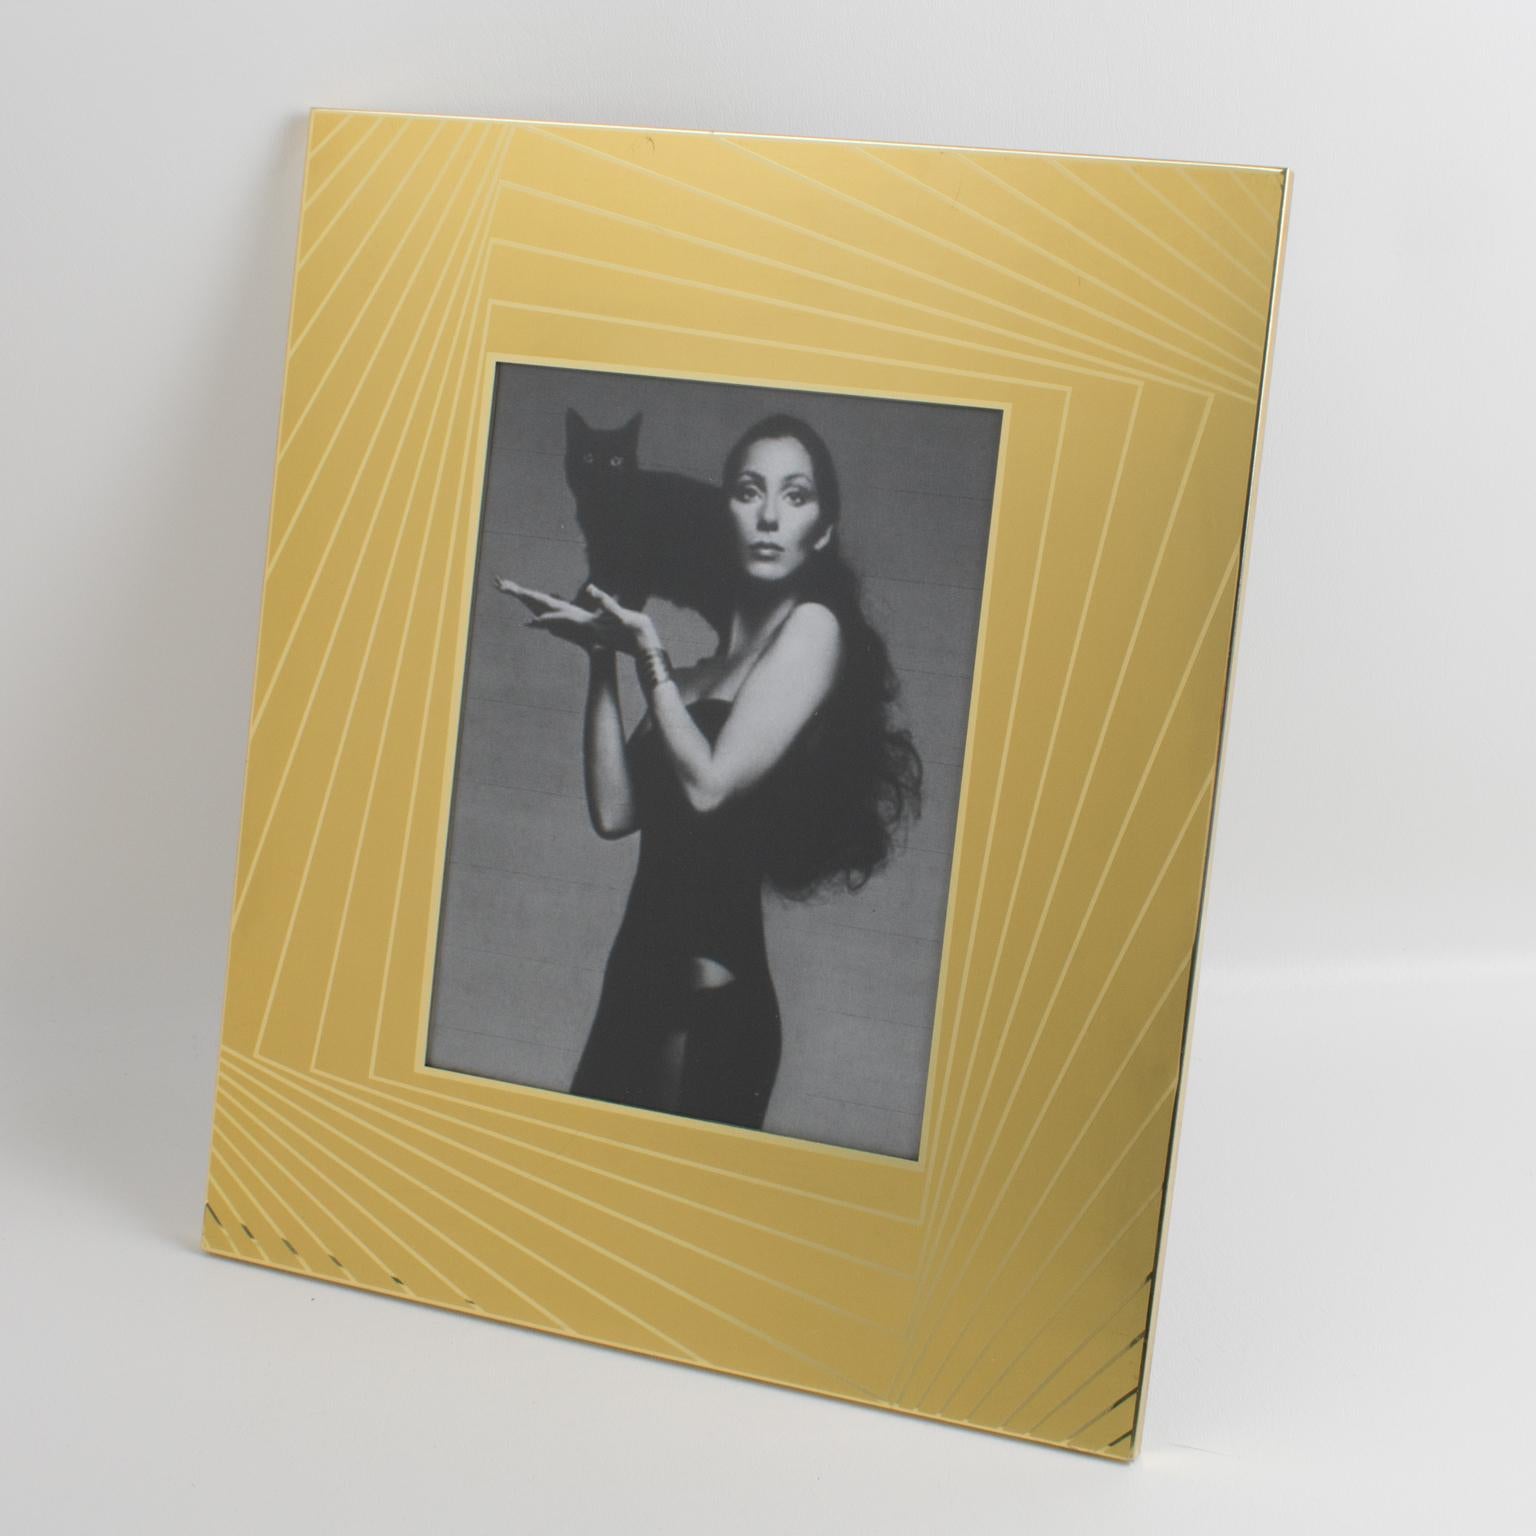 Mesmerizing 1970s picture photo frame, designed by Italian designer Umberto Mascagni in Bologna. Gilded aluminum with a shiny and frosted pattern. Metal easel at the back. Marked on the easel: 